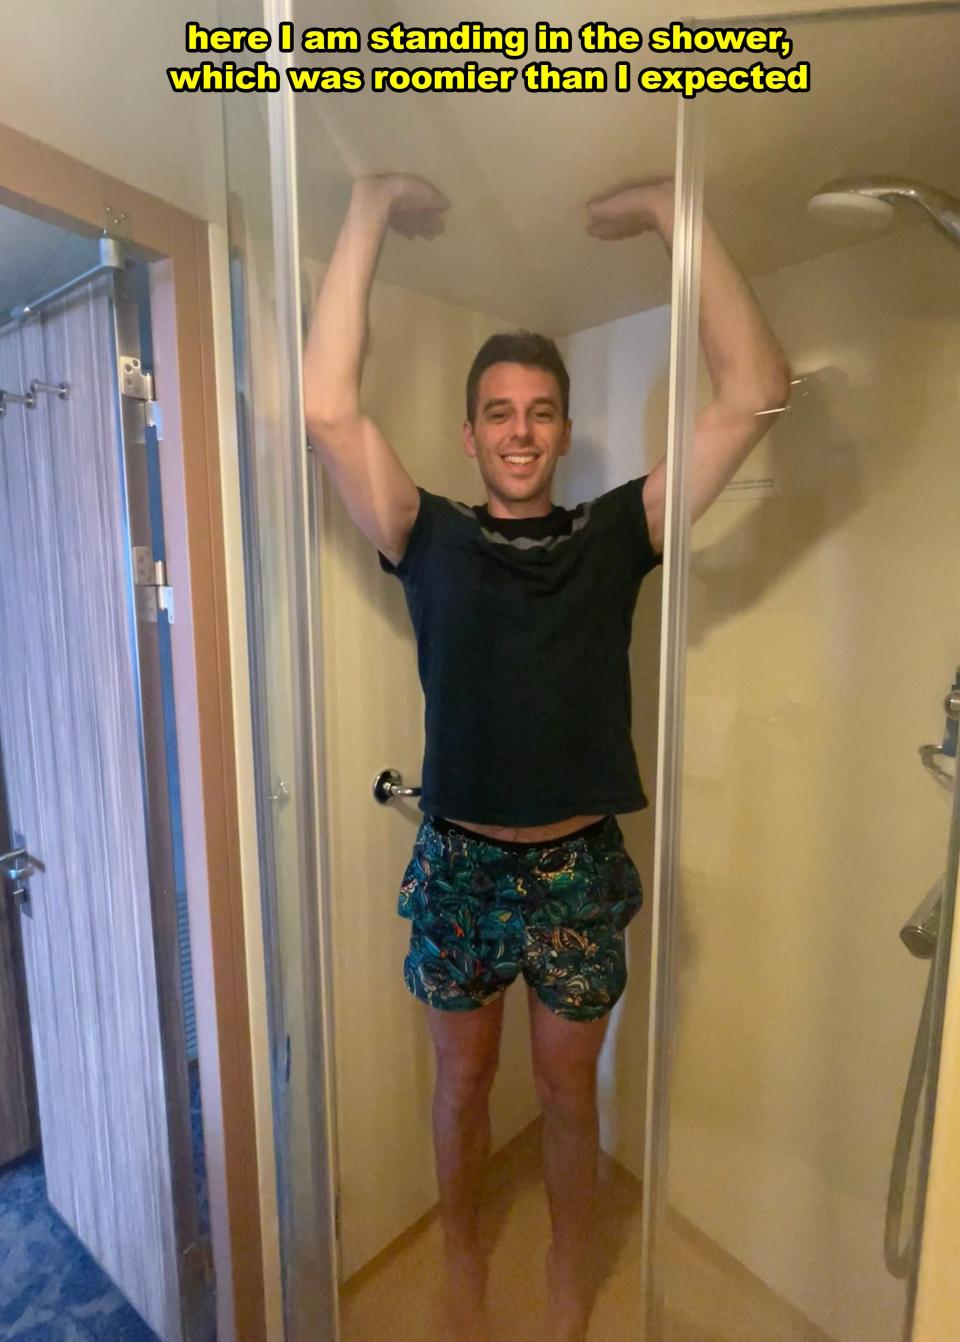 Man in shorts smiling inside a spacious shower, with text overlay about the shower's size